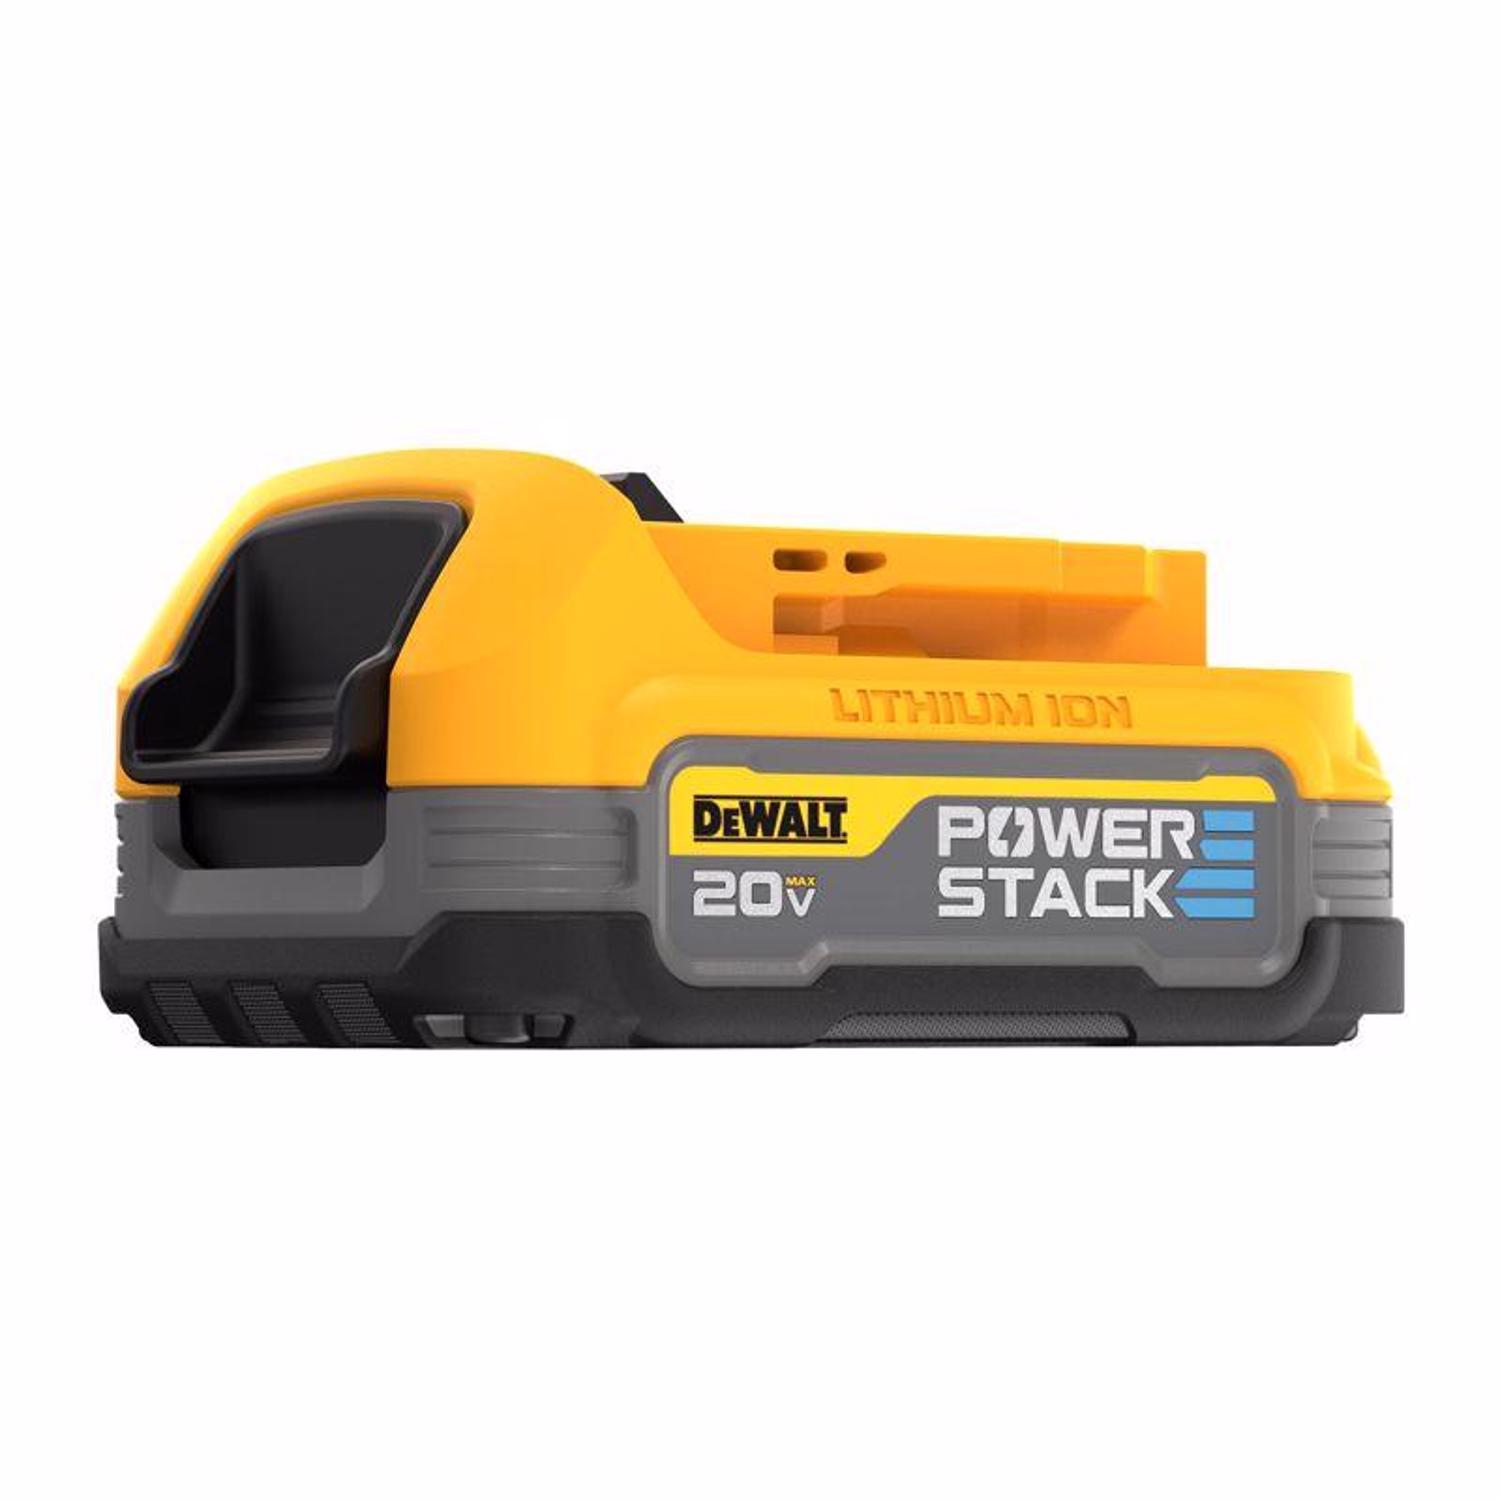 Photos - Battery Charger DeWALT 20V MAX POWERSTACK DCBP034 Lithium-Ion Compact Battery 1 pc 